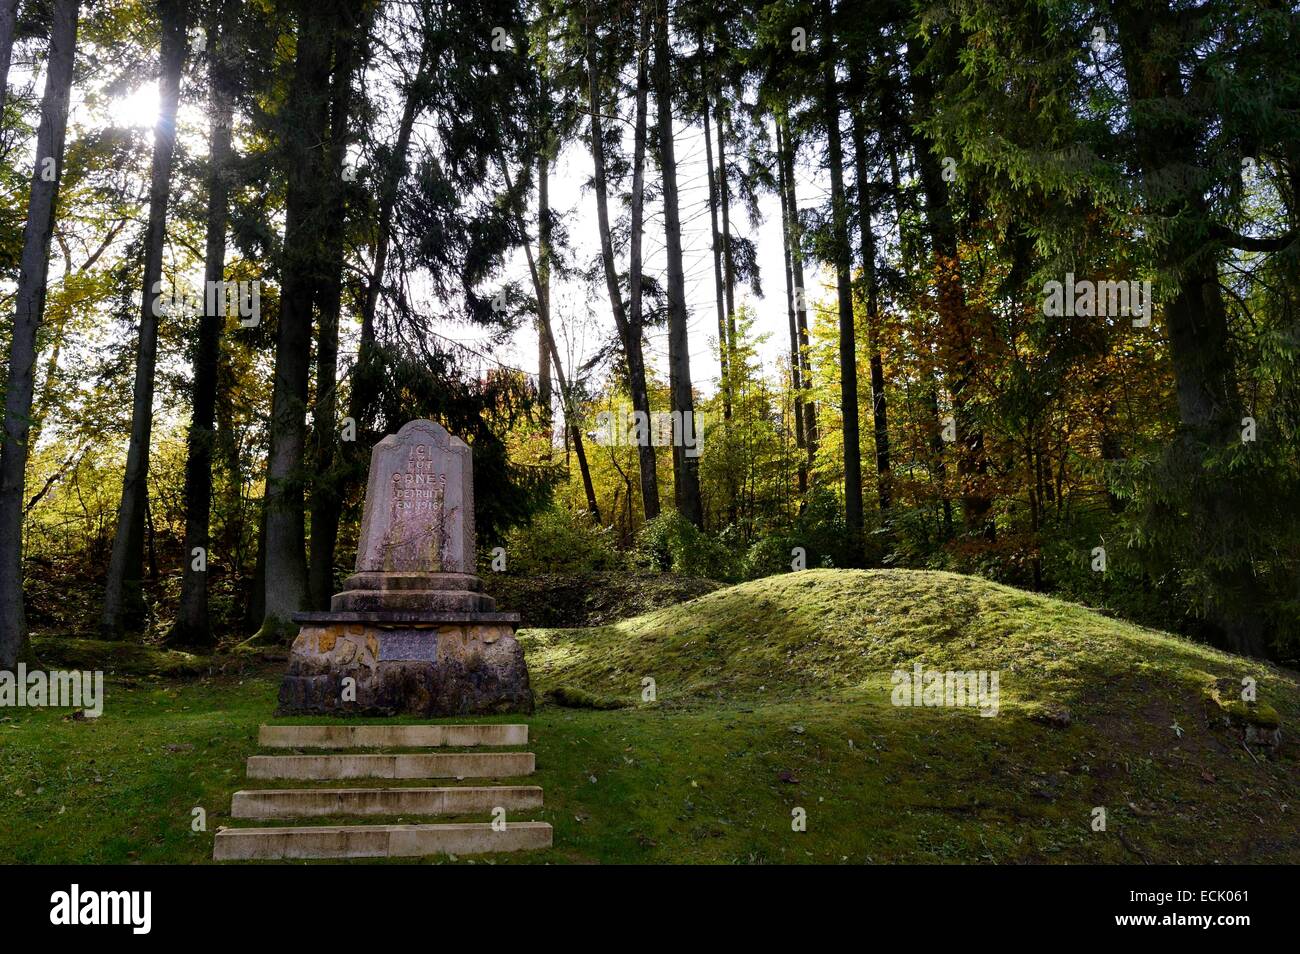 France, Meuse, Verdun region, battle of Verdun, the village of Ornes classified as mort pour la France (dead for France) is part of French villages destroyed in the First World War, the stele Stock Photo